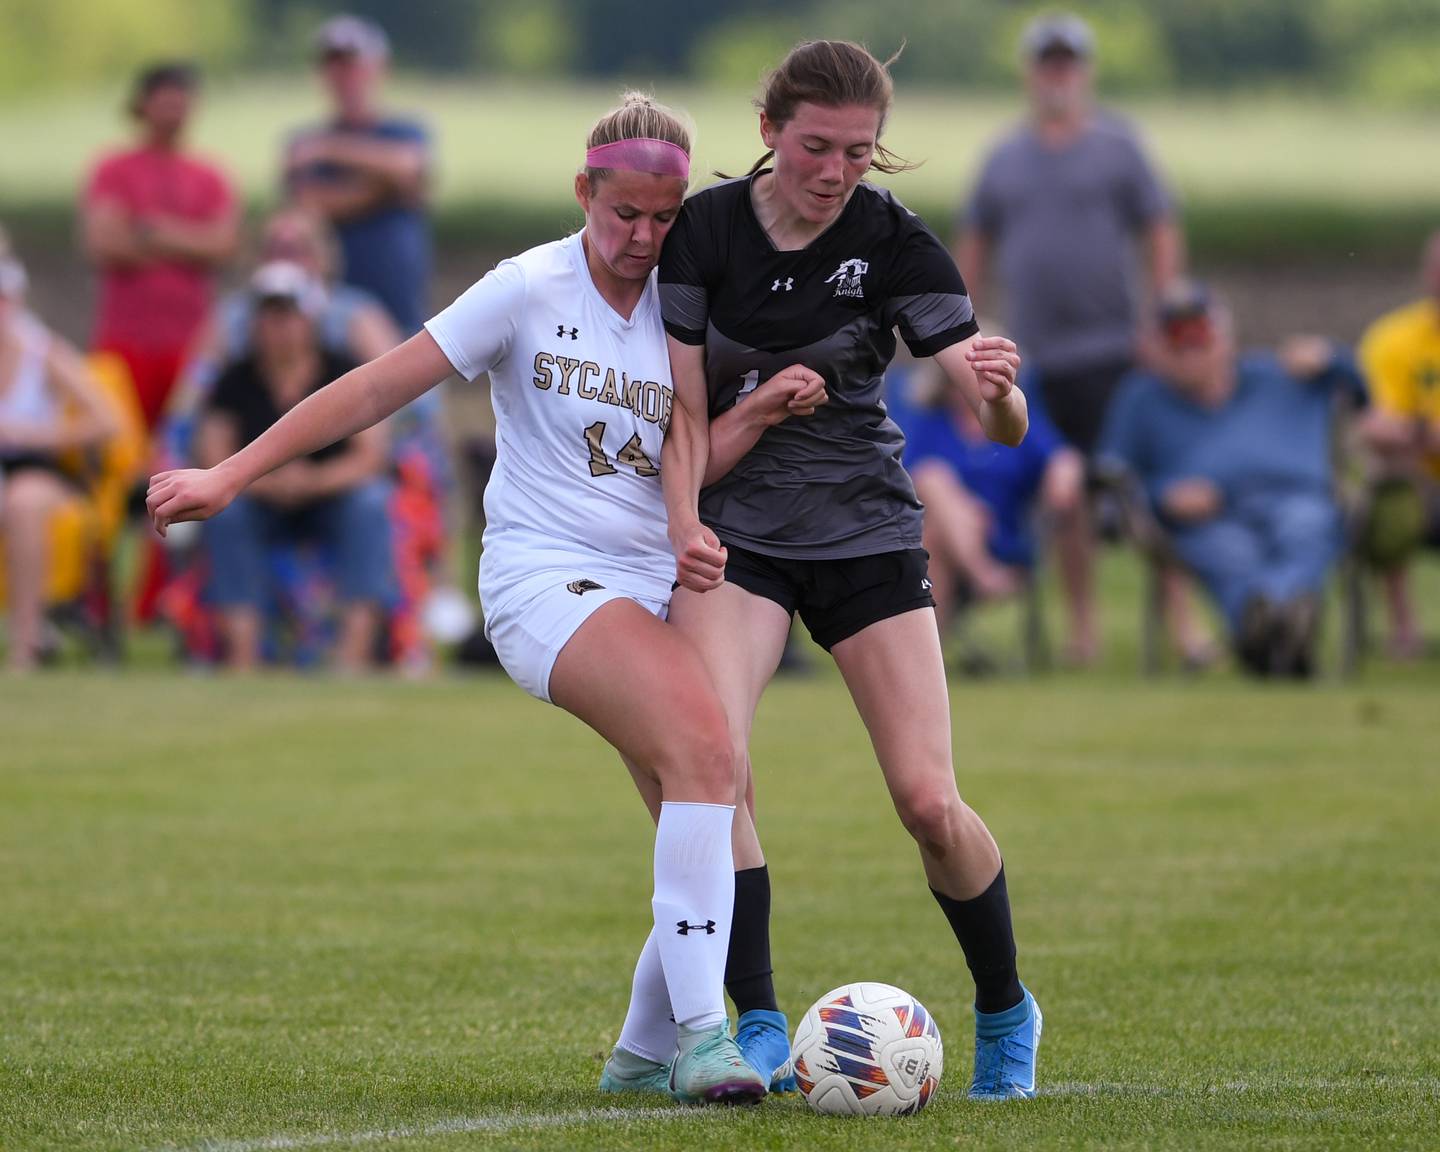 Sycamore's Peyton Wright (14) and Kaneland's Erin Doucette (14) collide while going after the ball during the regional title game held on Saturday May 18, 2024, at Kaneland High School.